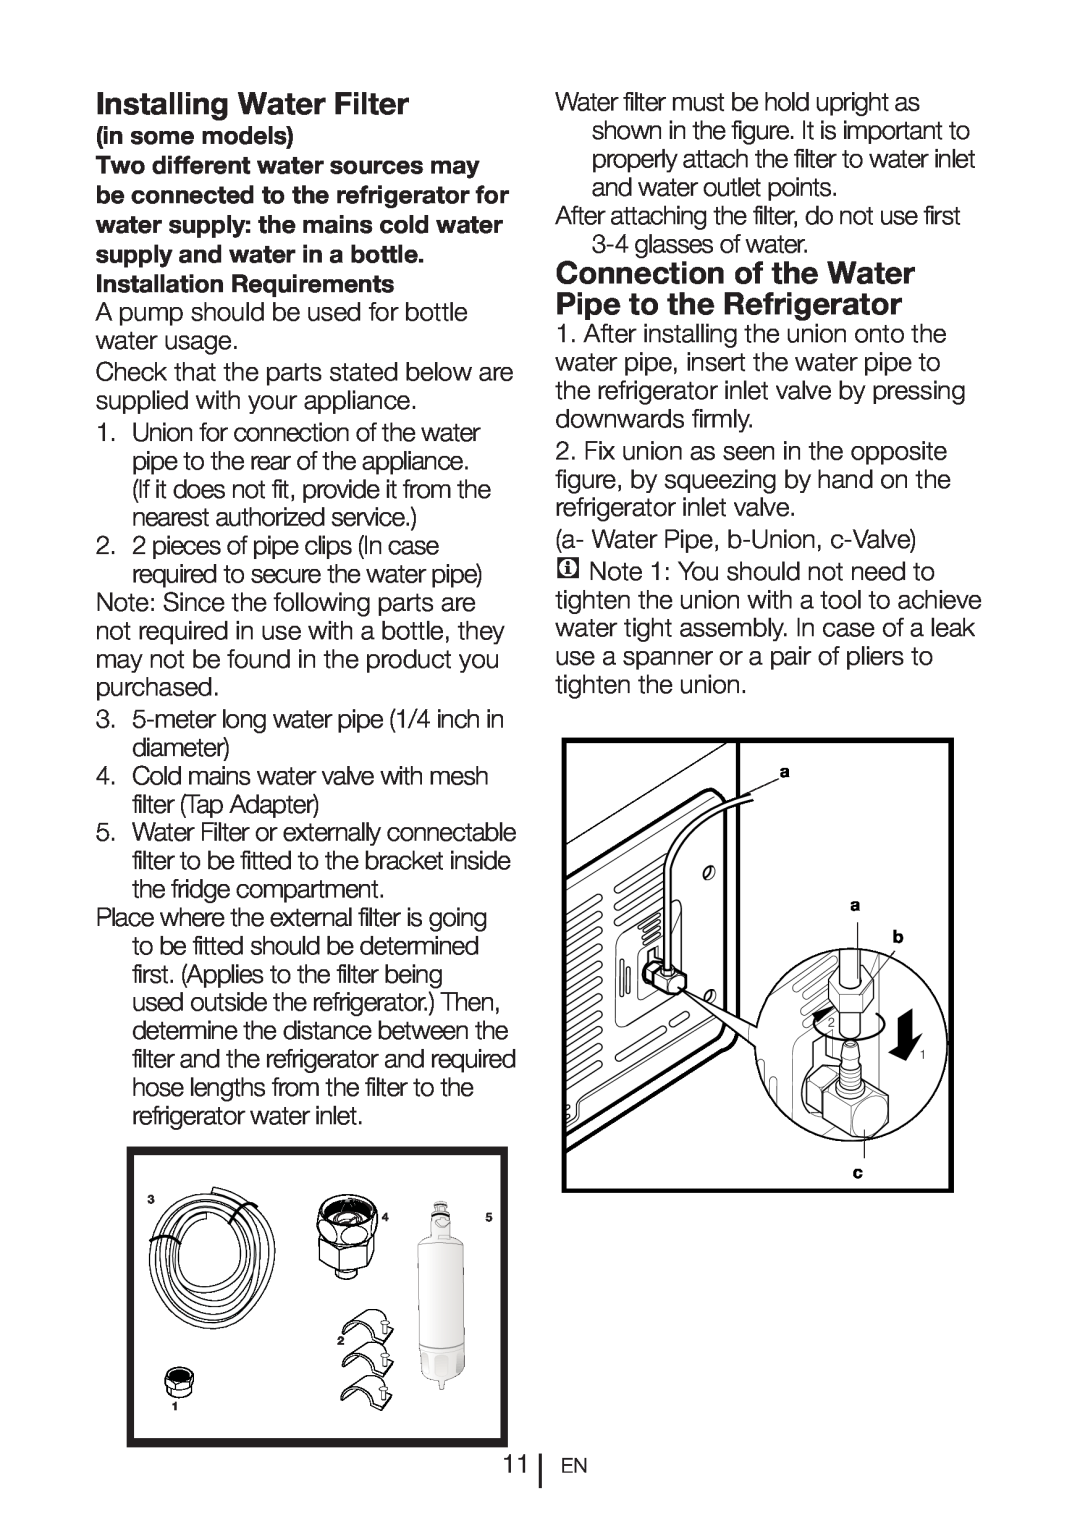 Beko GNE 60520 DX manual Installing Water Filter, Connection of the Water Pipe to the Refrigerator, in some models 